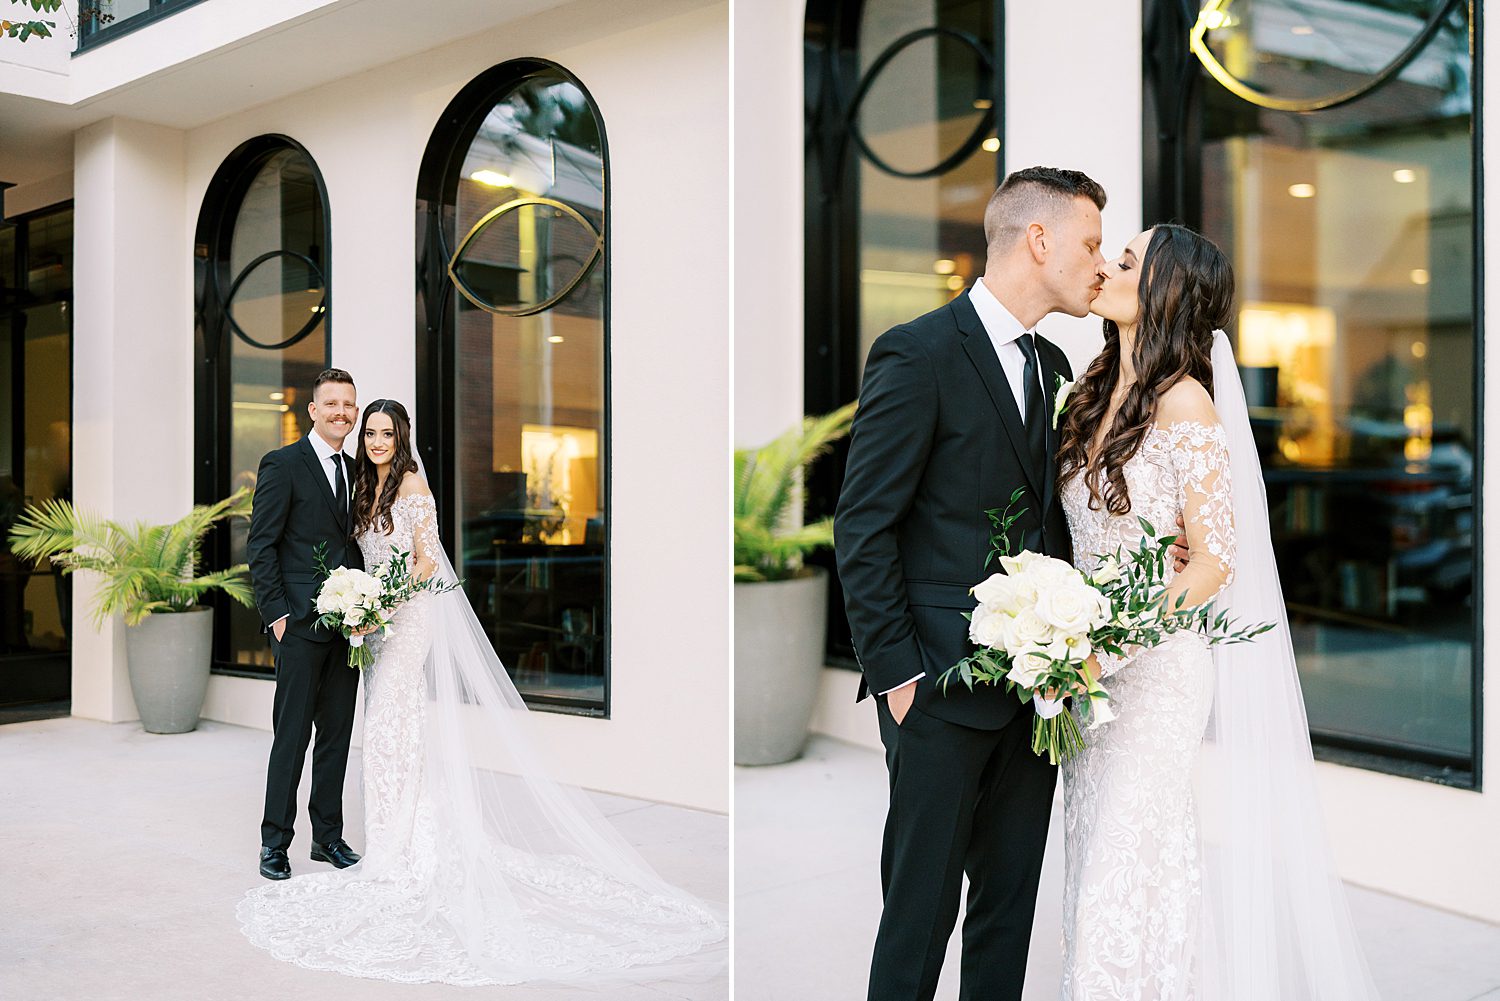 newlyweds kiss in front of archway windows at the Hotel Haya